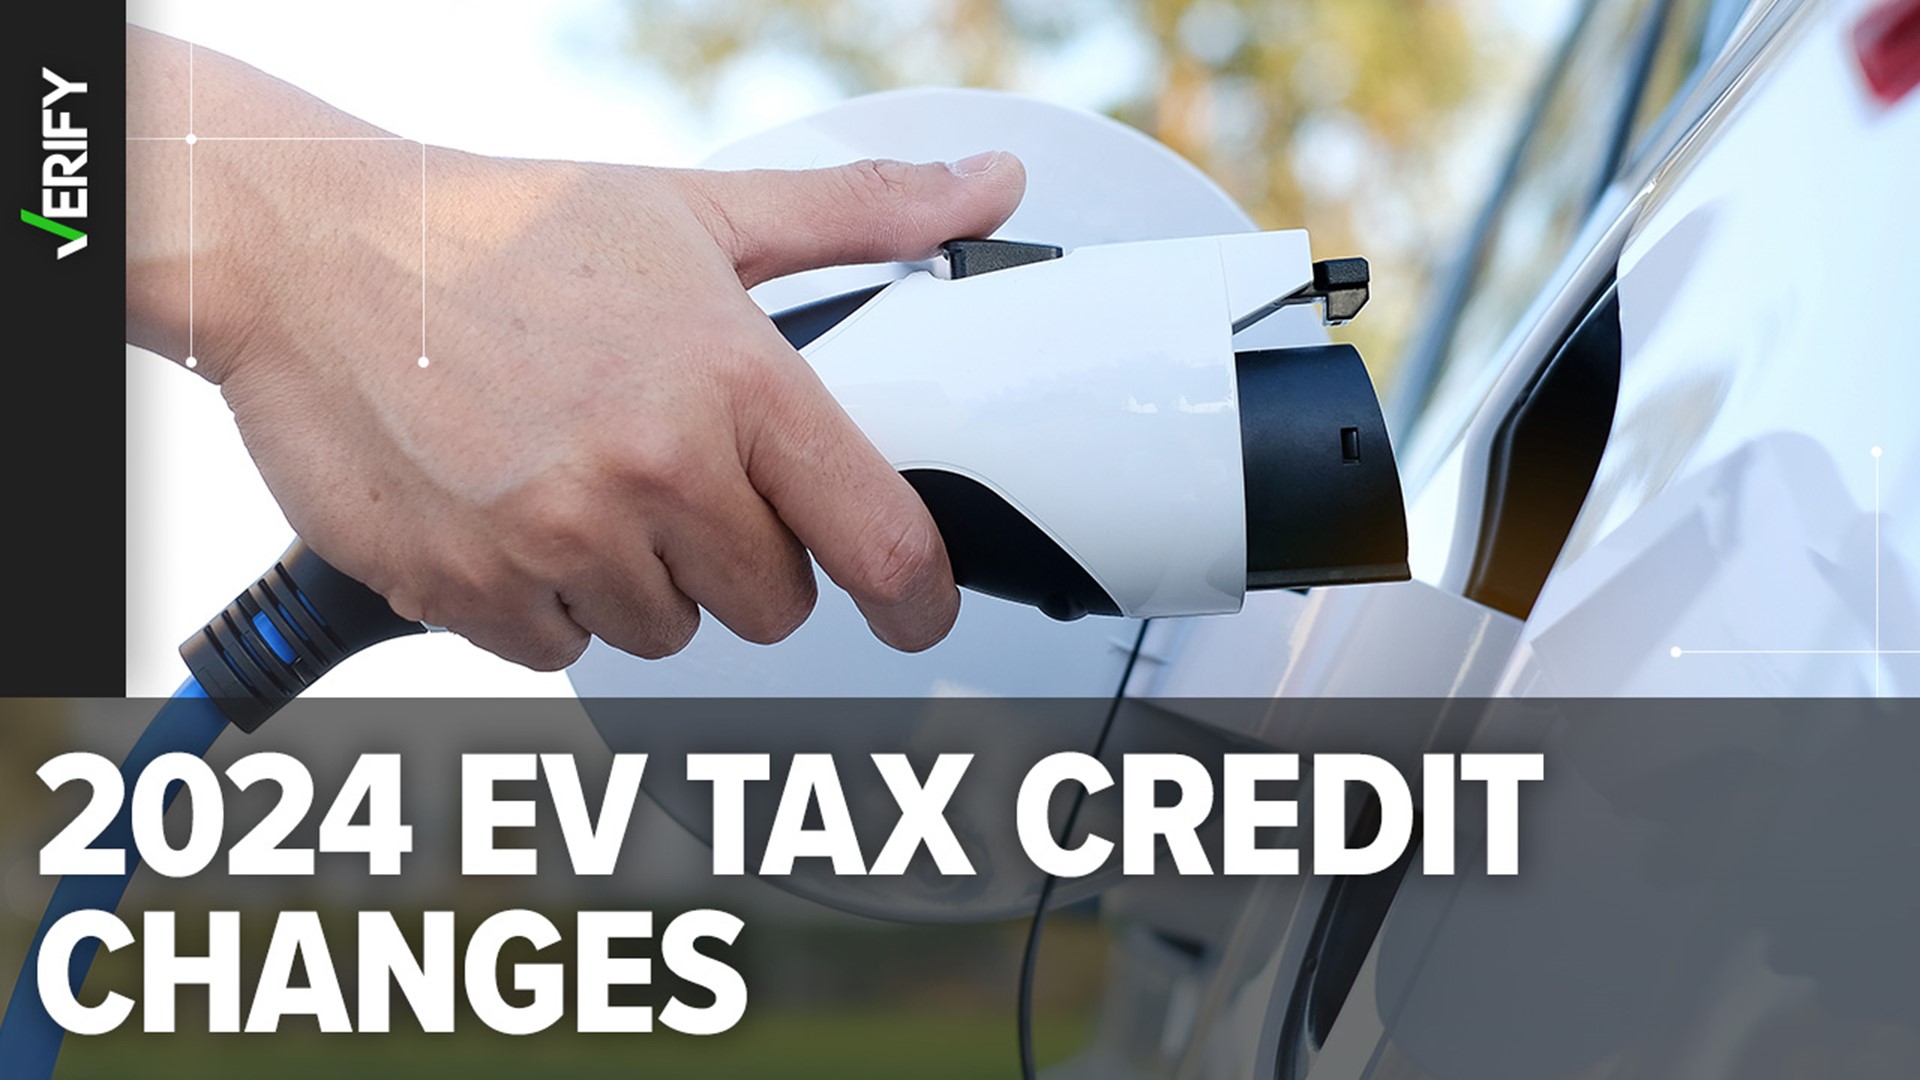 The rules for clean vehicle tax credits changed on Jan. 1, 2024. Here’s what we can VERIFY about which EVs are eligible for the credit in the new year.